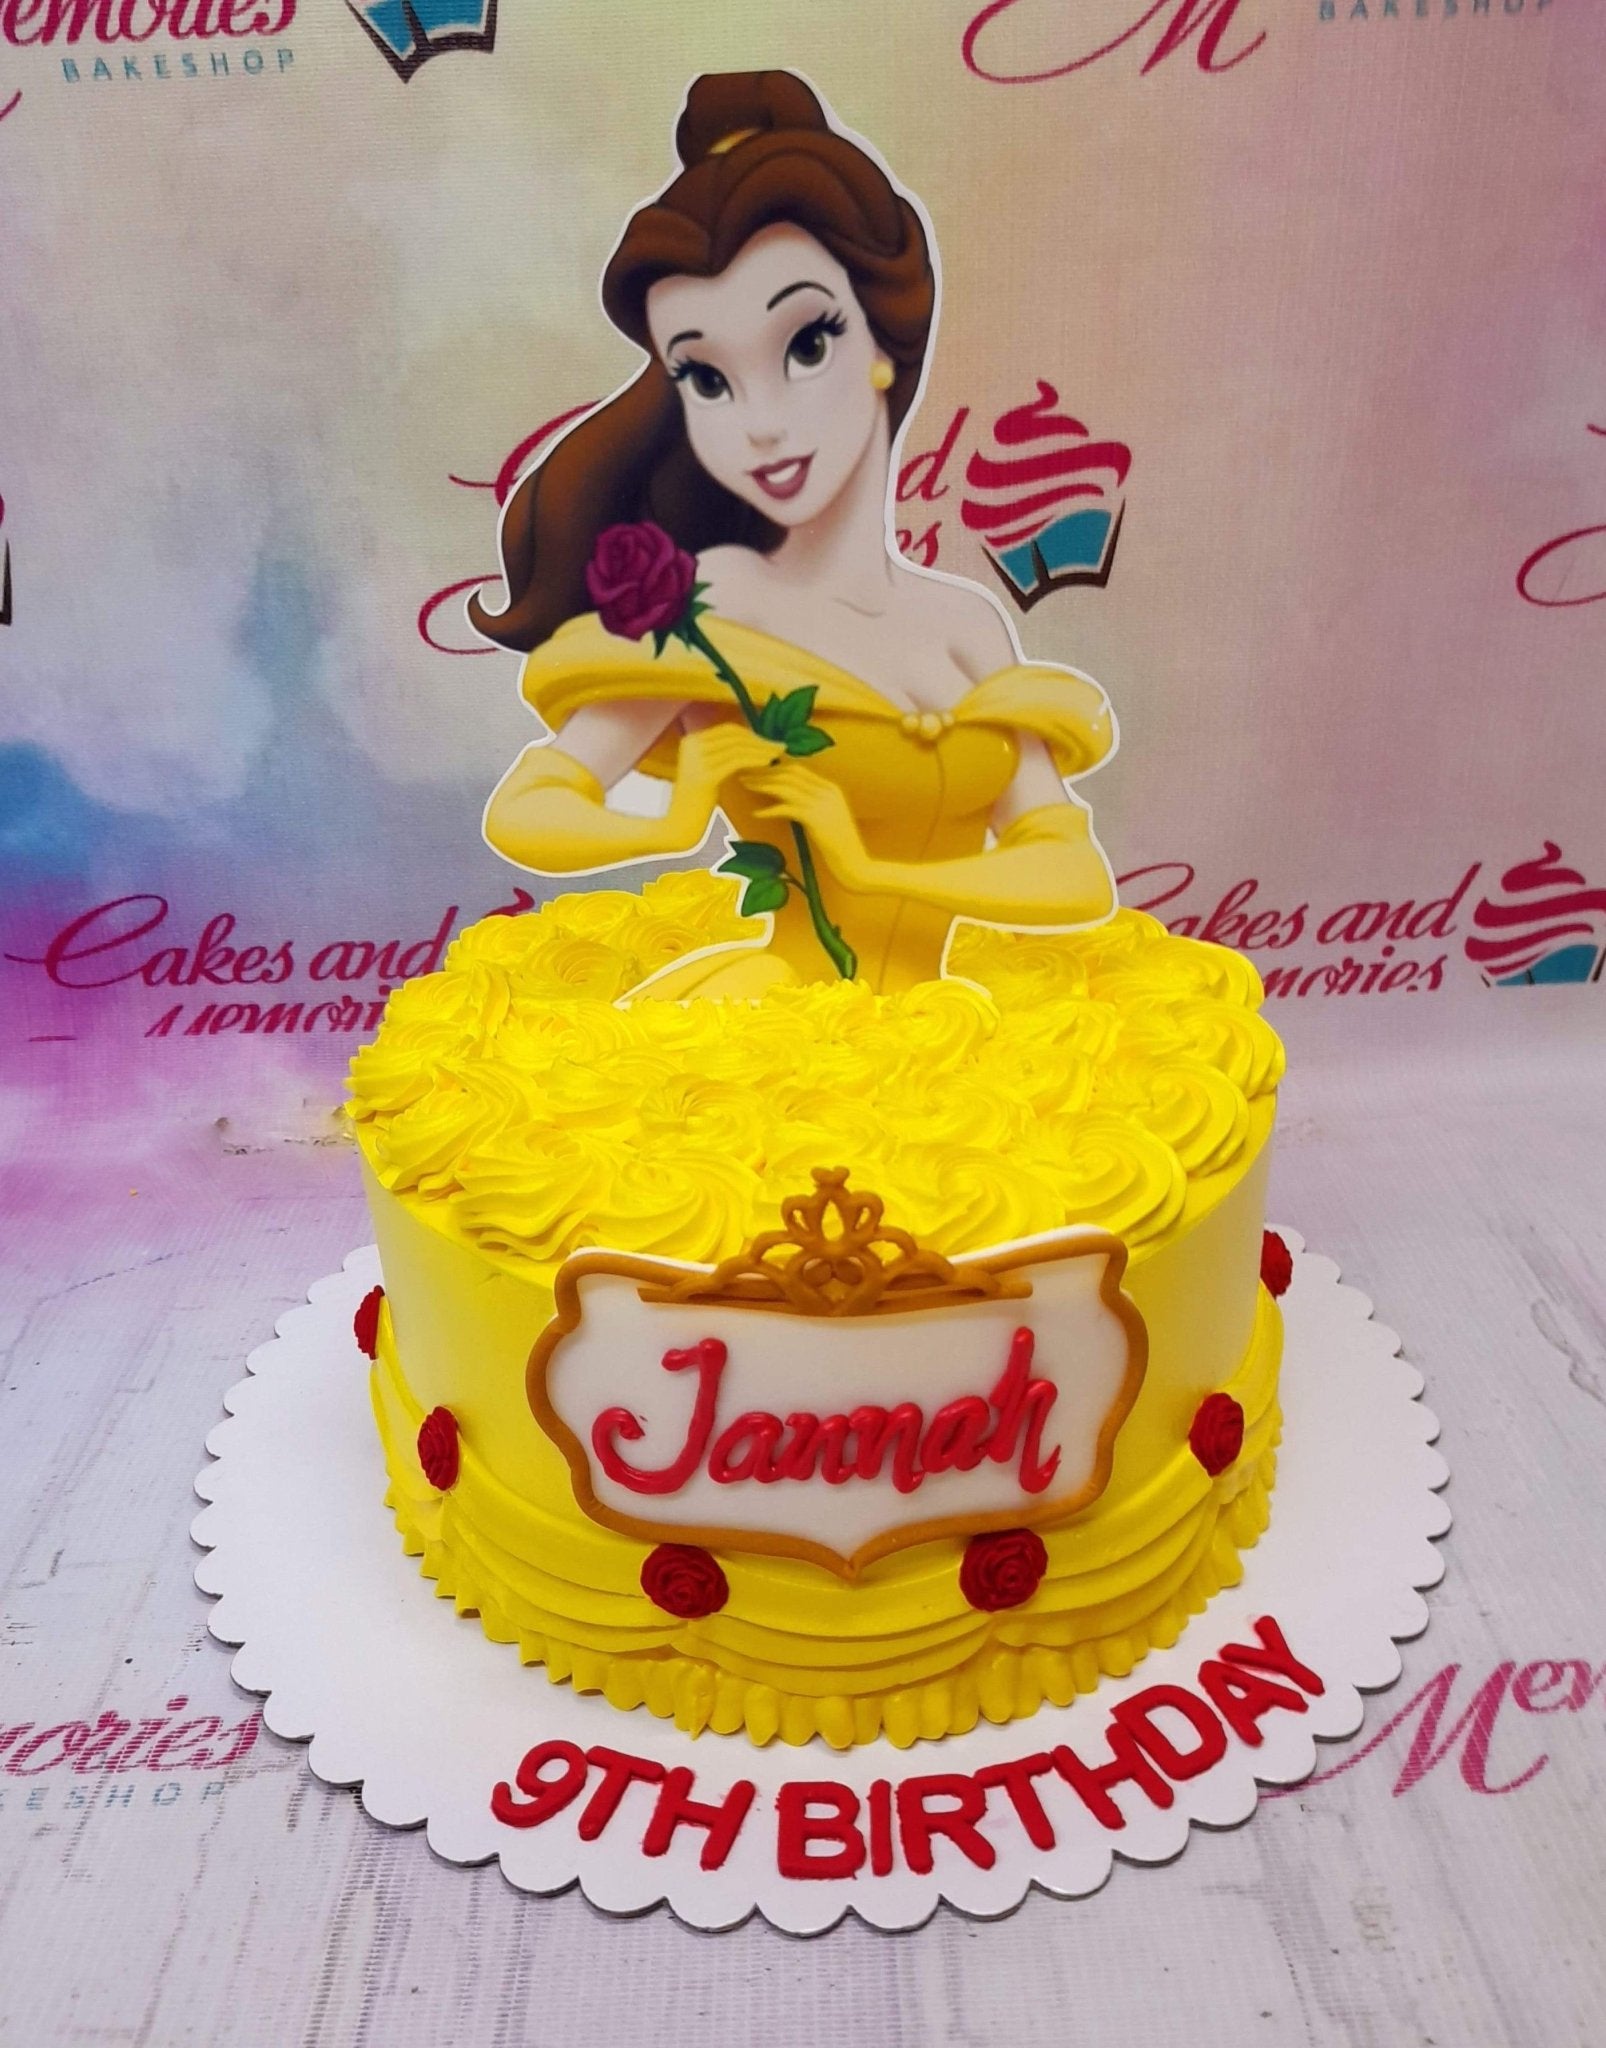 Princess Belle Cake | Beauty and the Beast | A Decorating Tutorial - YouTube